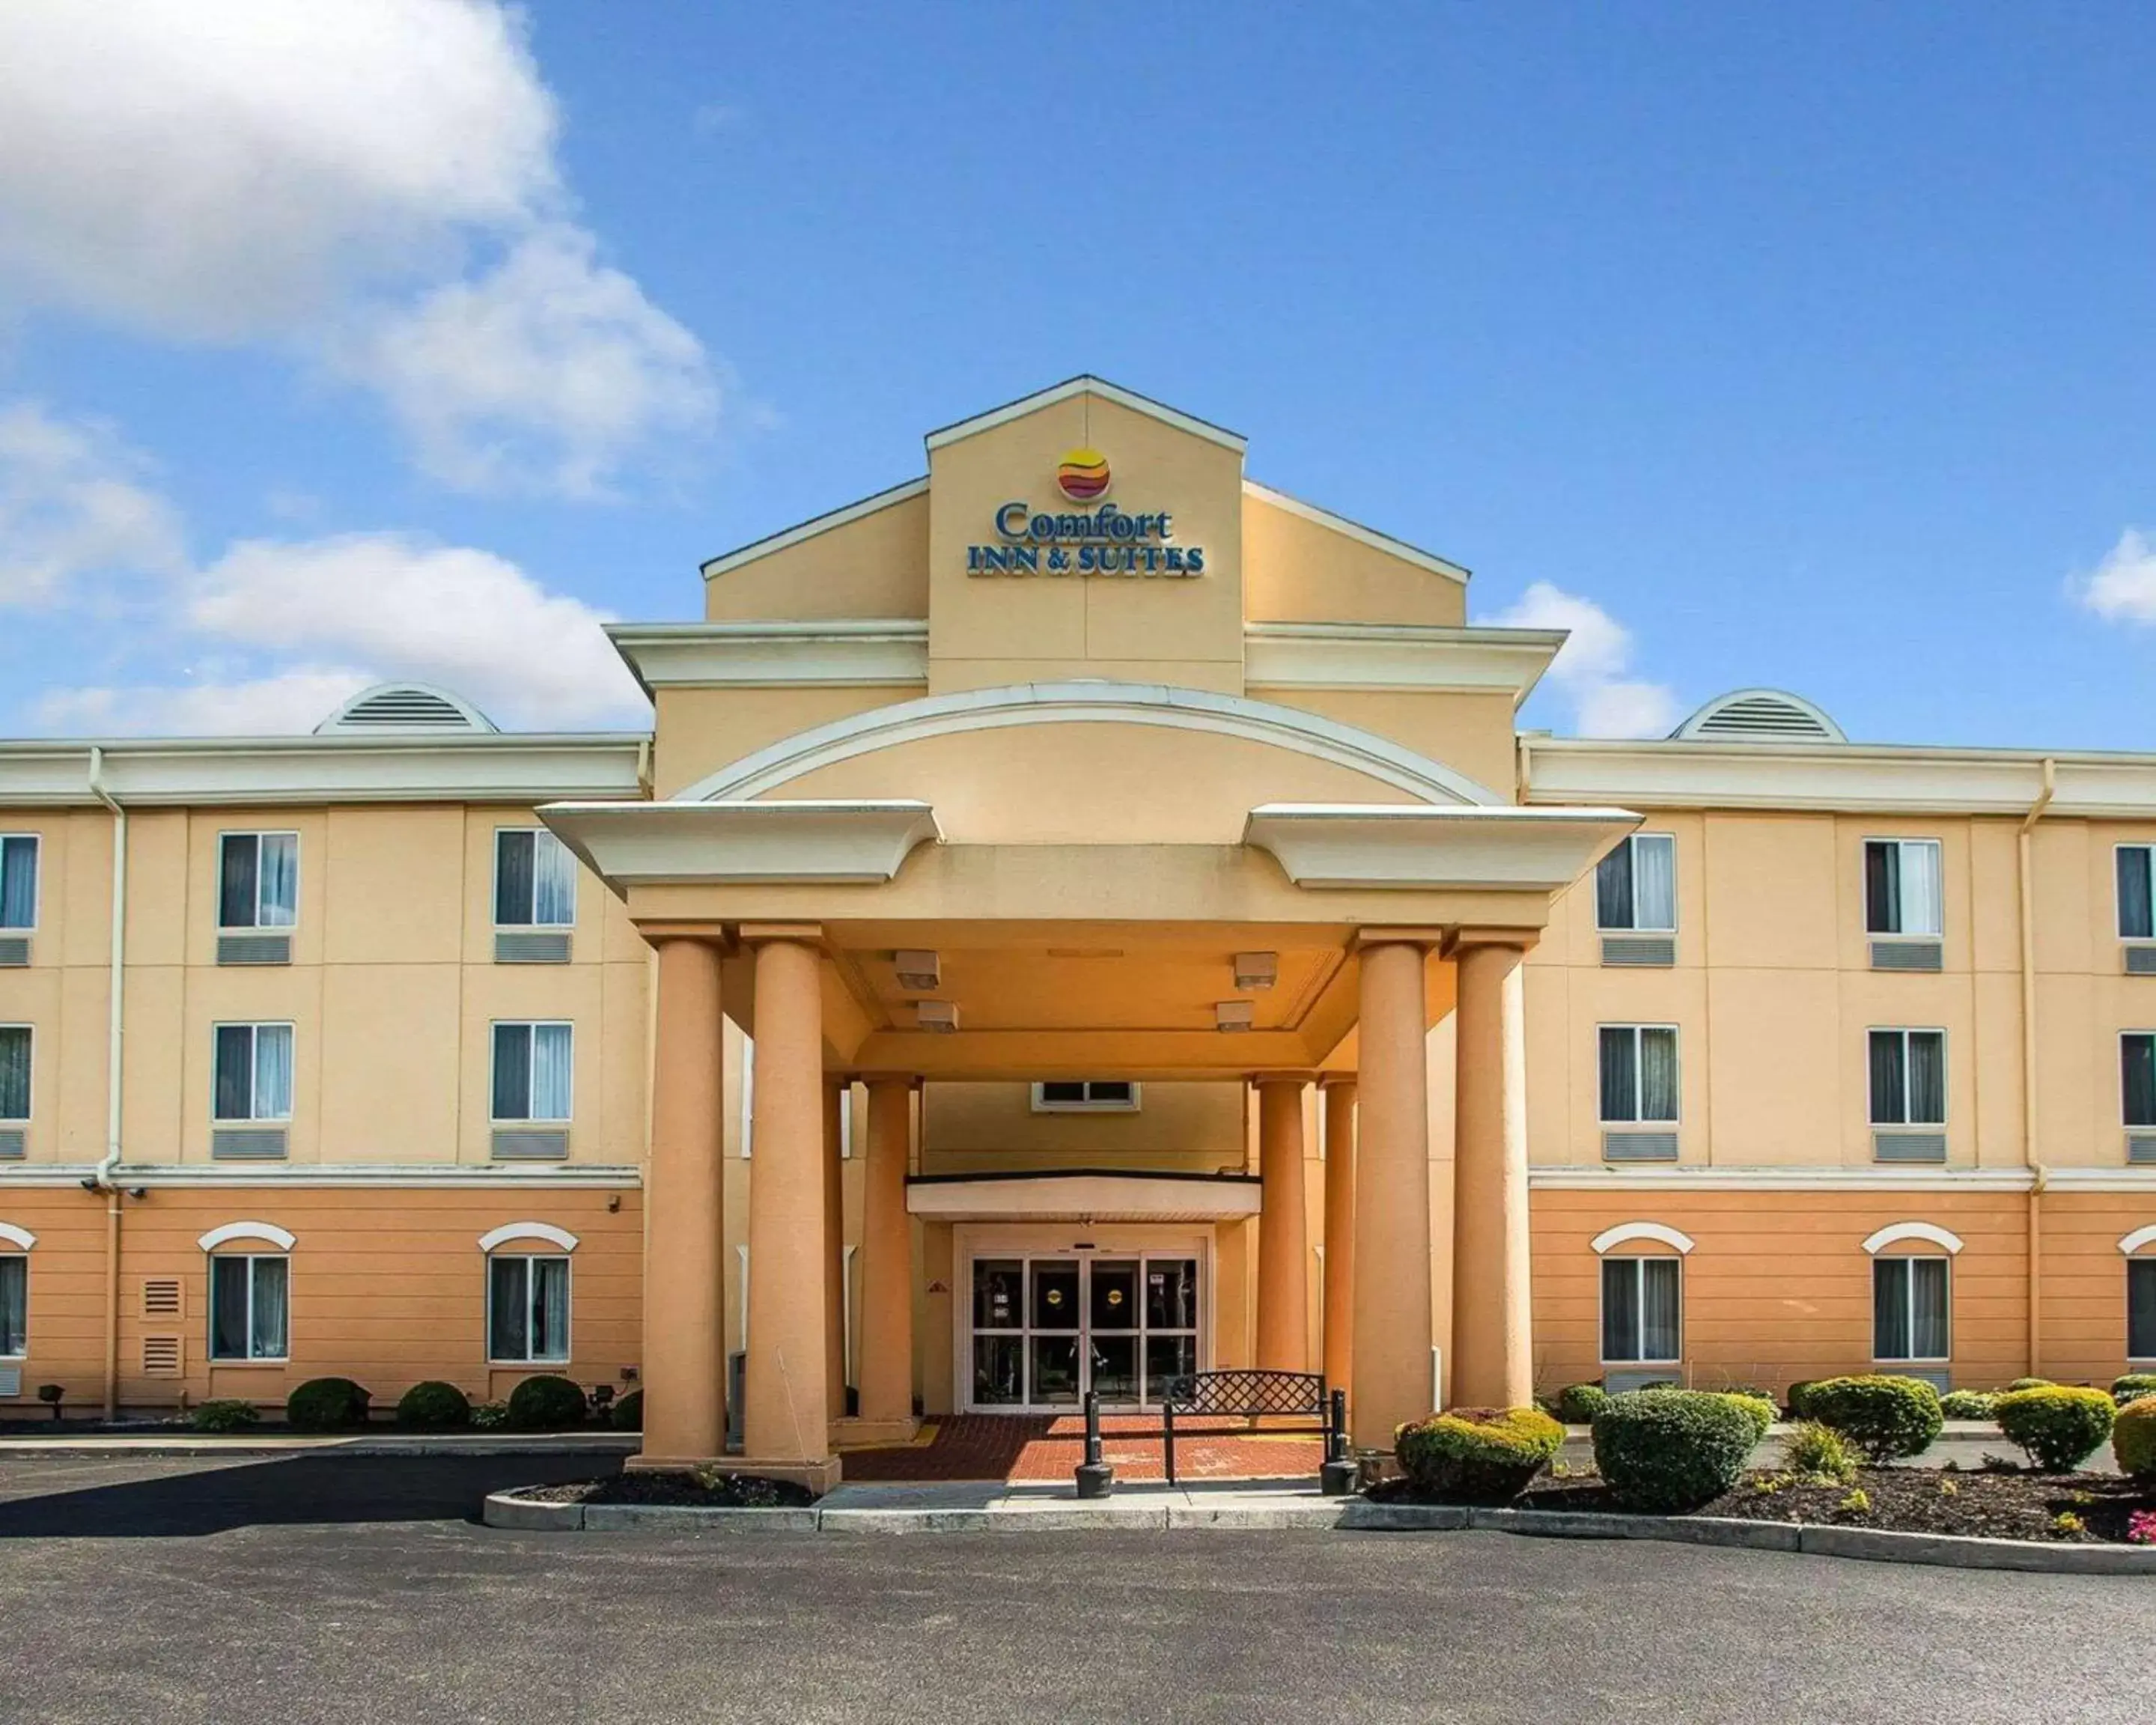 Property building in Comfort Inn & Suites Carneys Point